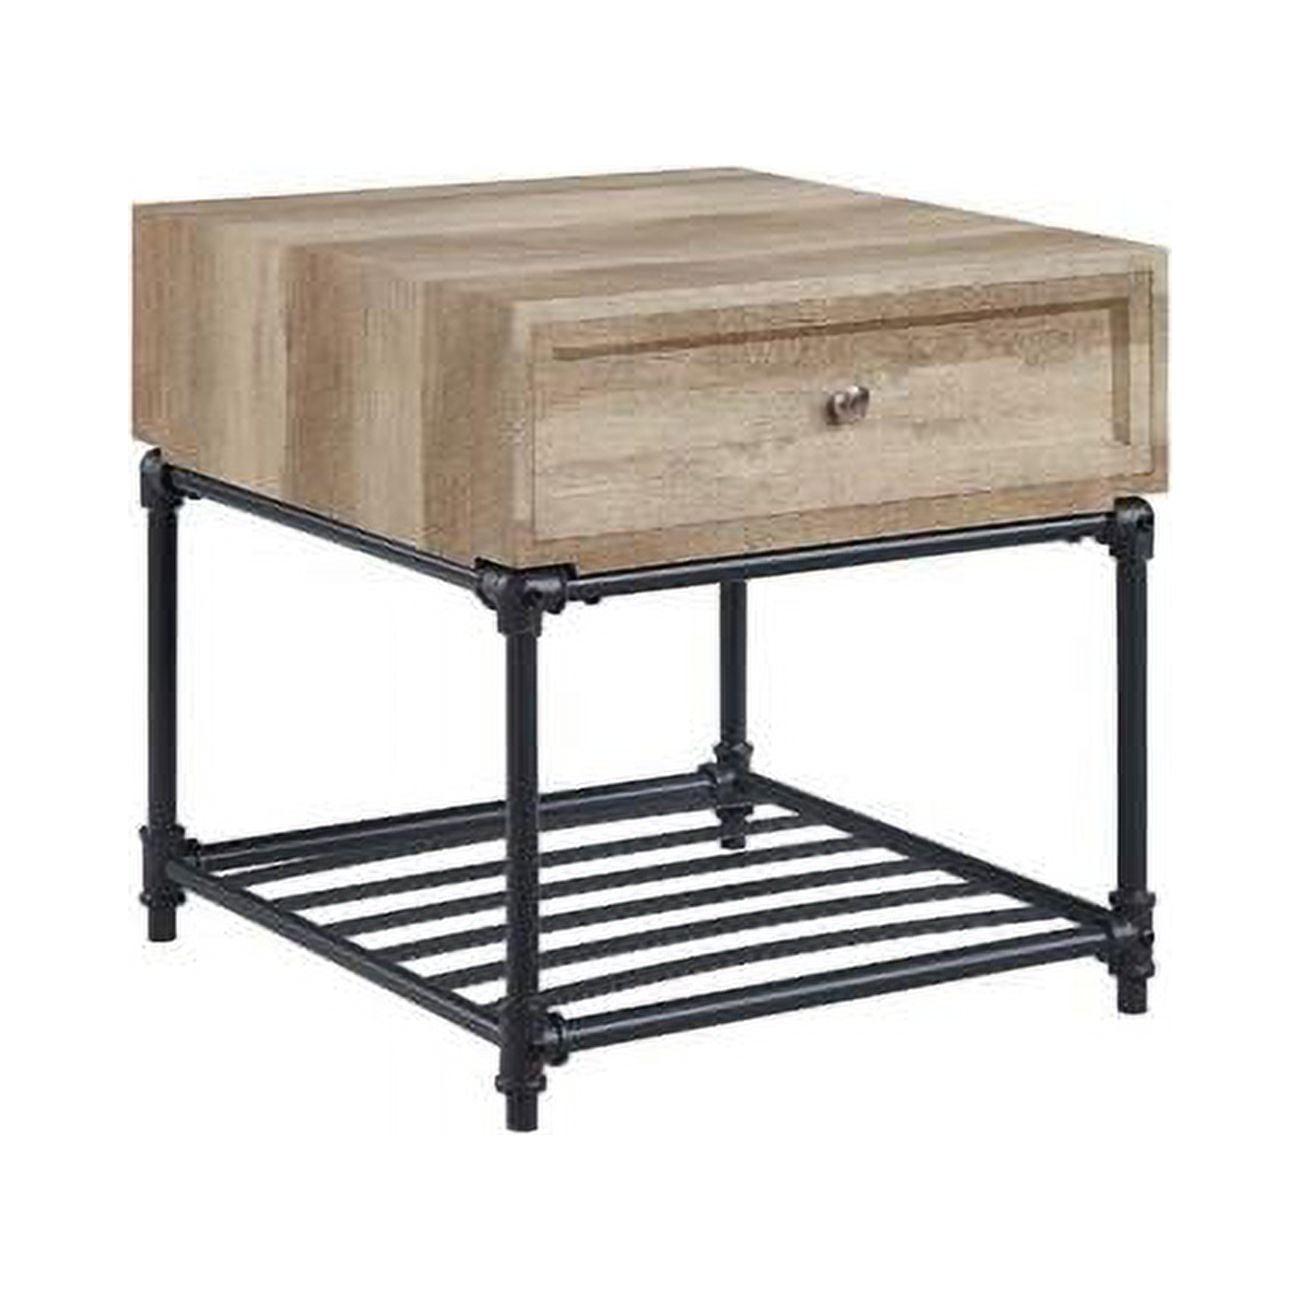 Brantley Industrial Oak and Sandy Black Square Side Table with Storage